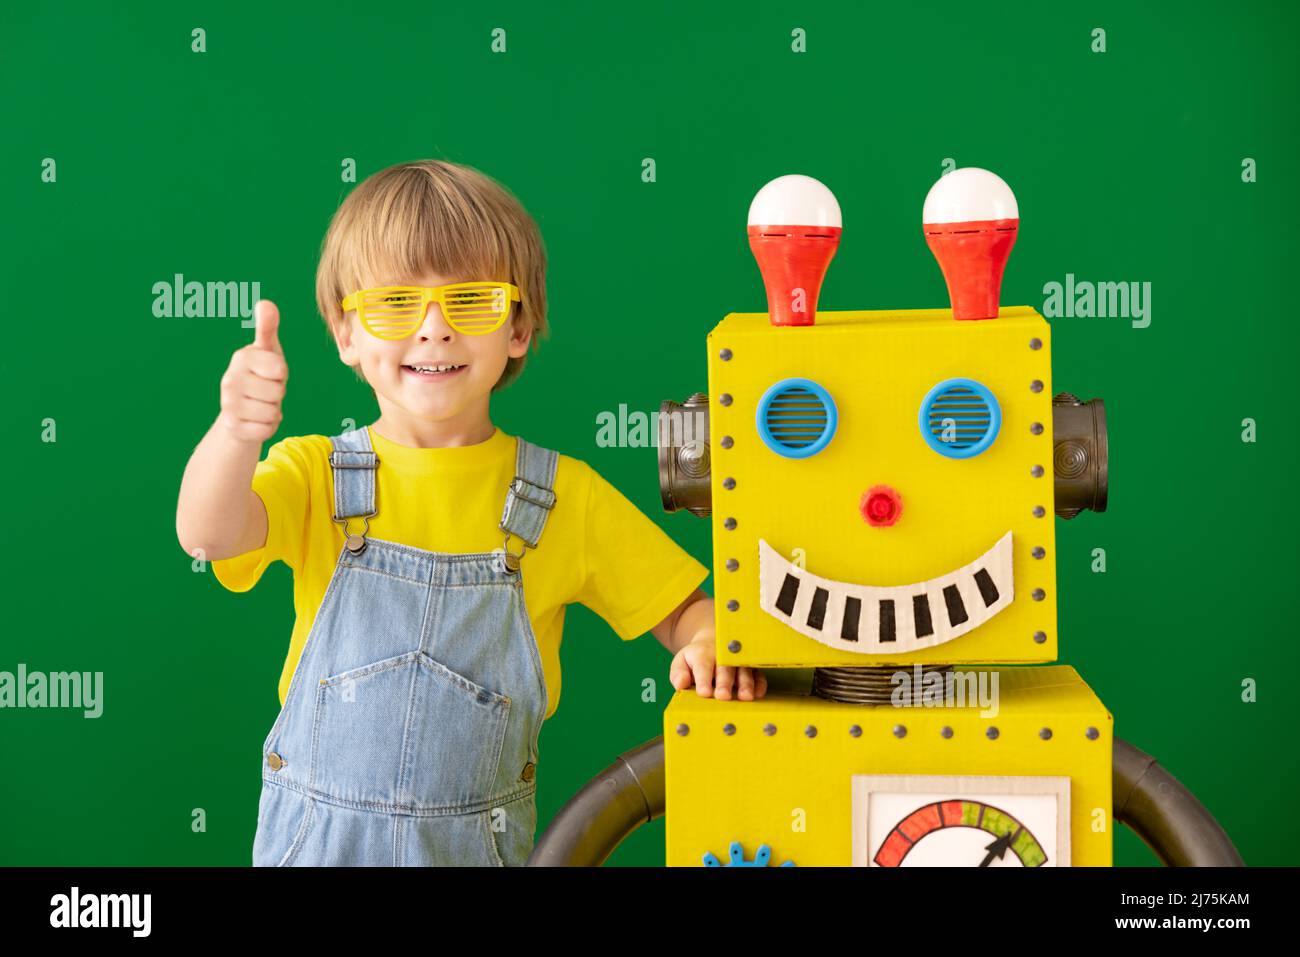 Happy child with toy robot at school. Funny kid against green chalkboard.  Education, creative and innovation technology concept Stock Photo - Alamy